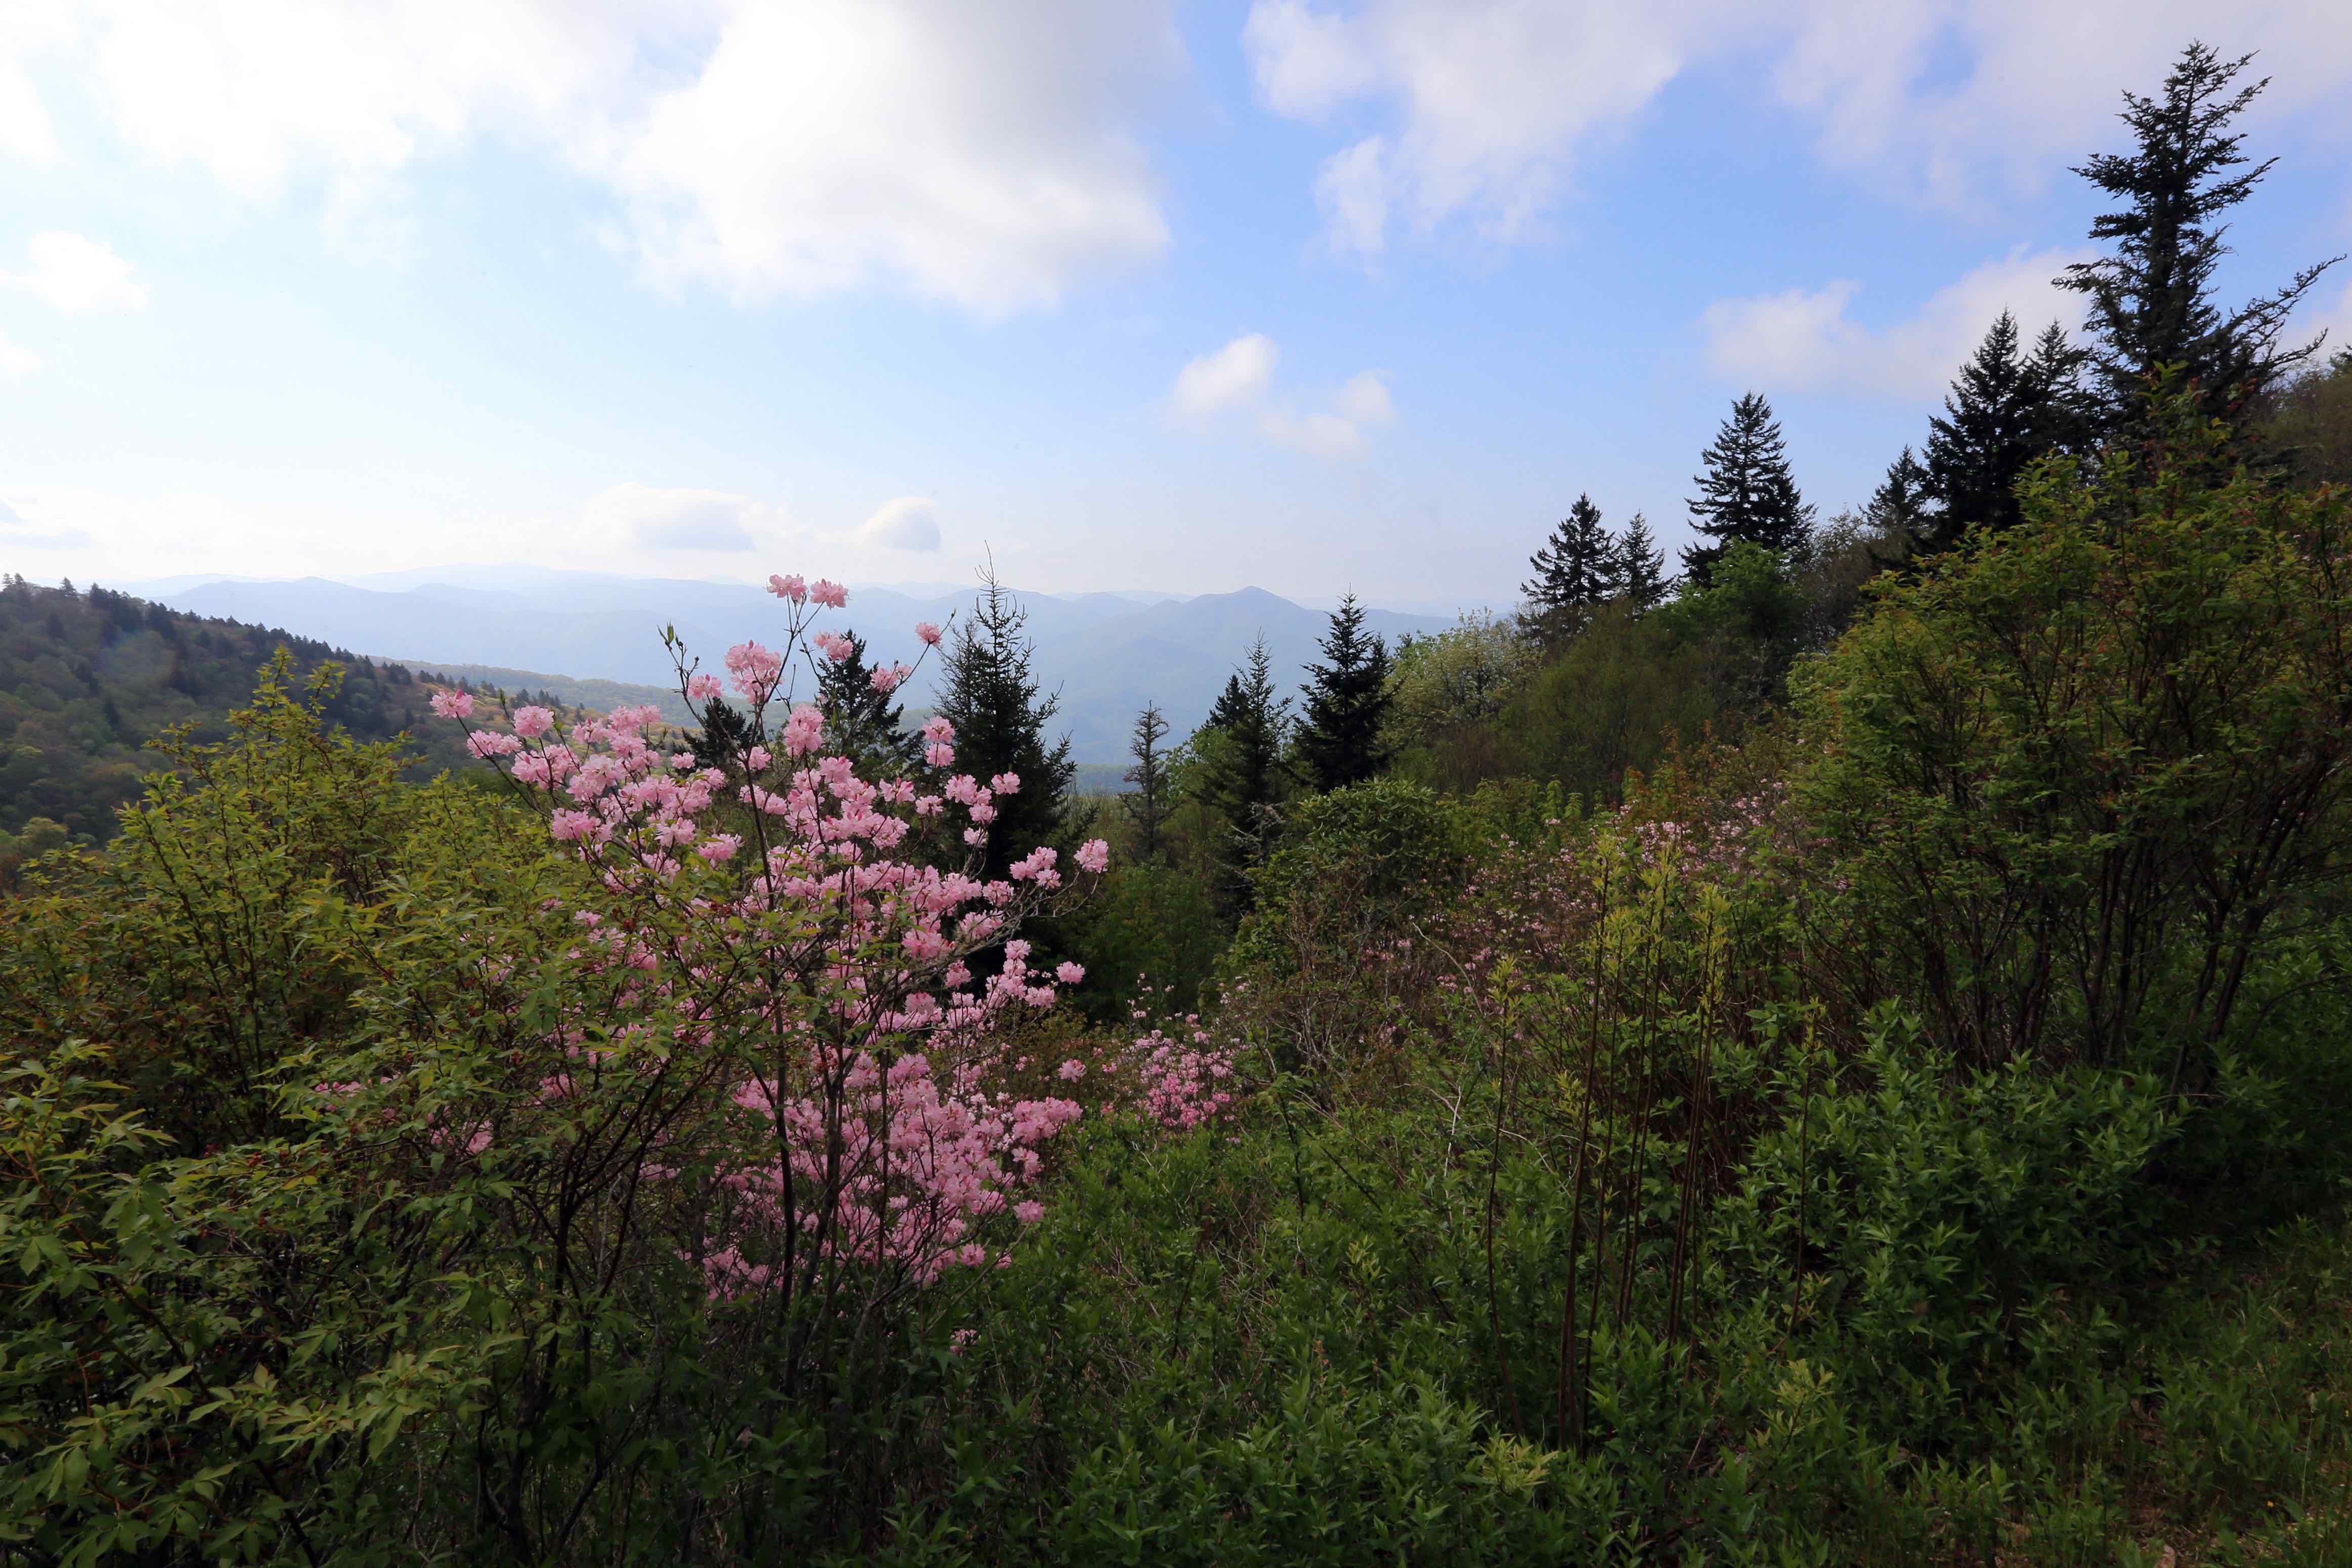 The Scientific Name is Rhododendron vaseyi. You will likely hear them called Pinkshell Azalea. This picture shows the Pinkshell Azalea blossoms along the Blue Ridge Parkway in mid-May near Graveyard Fields west of Asheville. of Rhododendron vaseyi